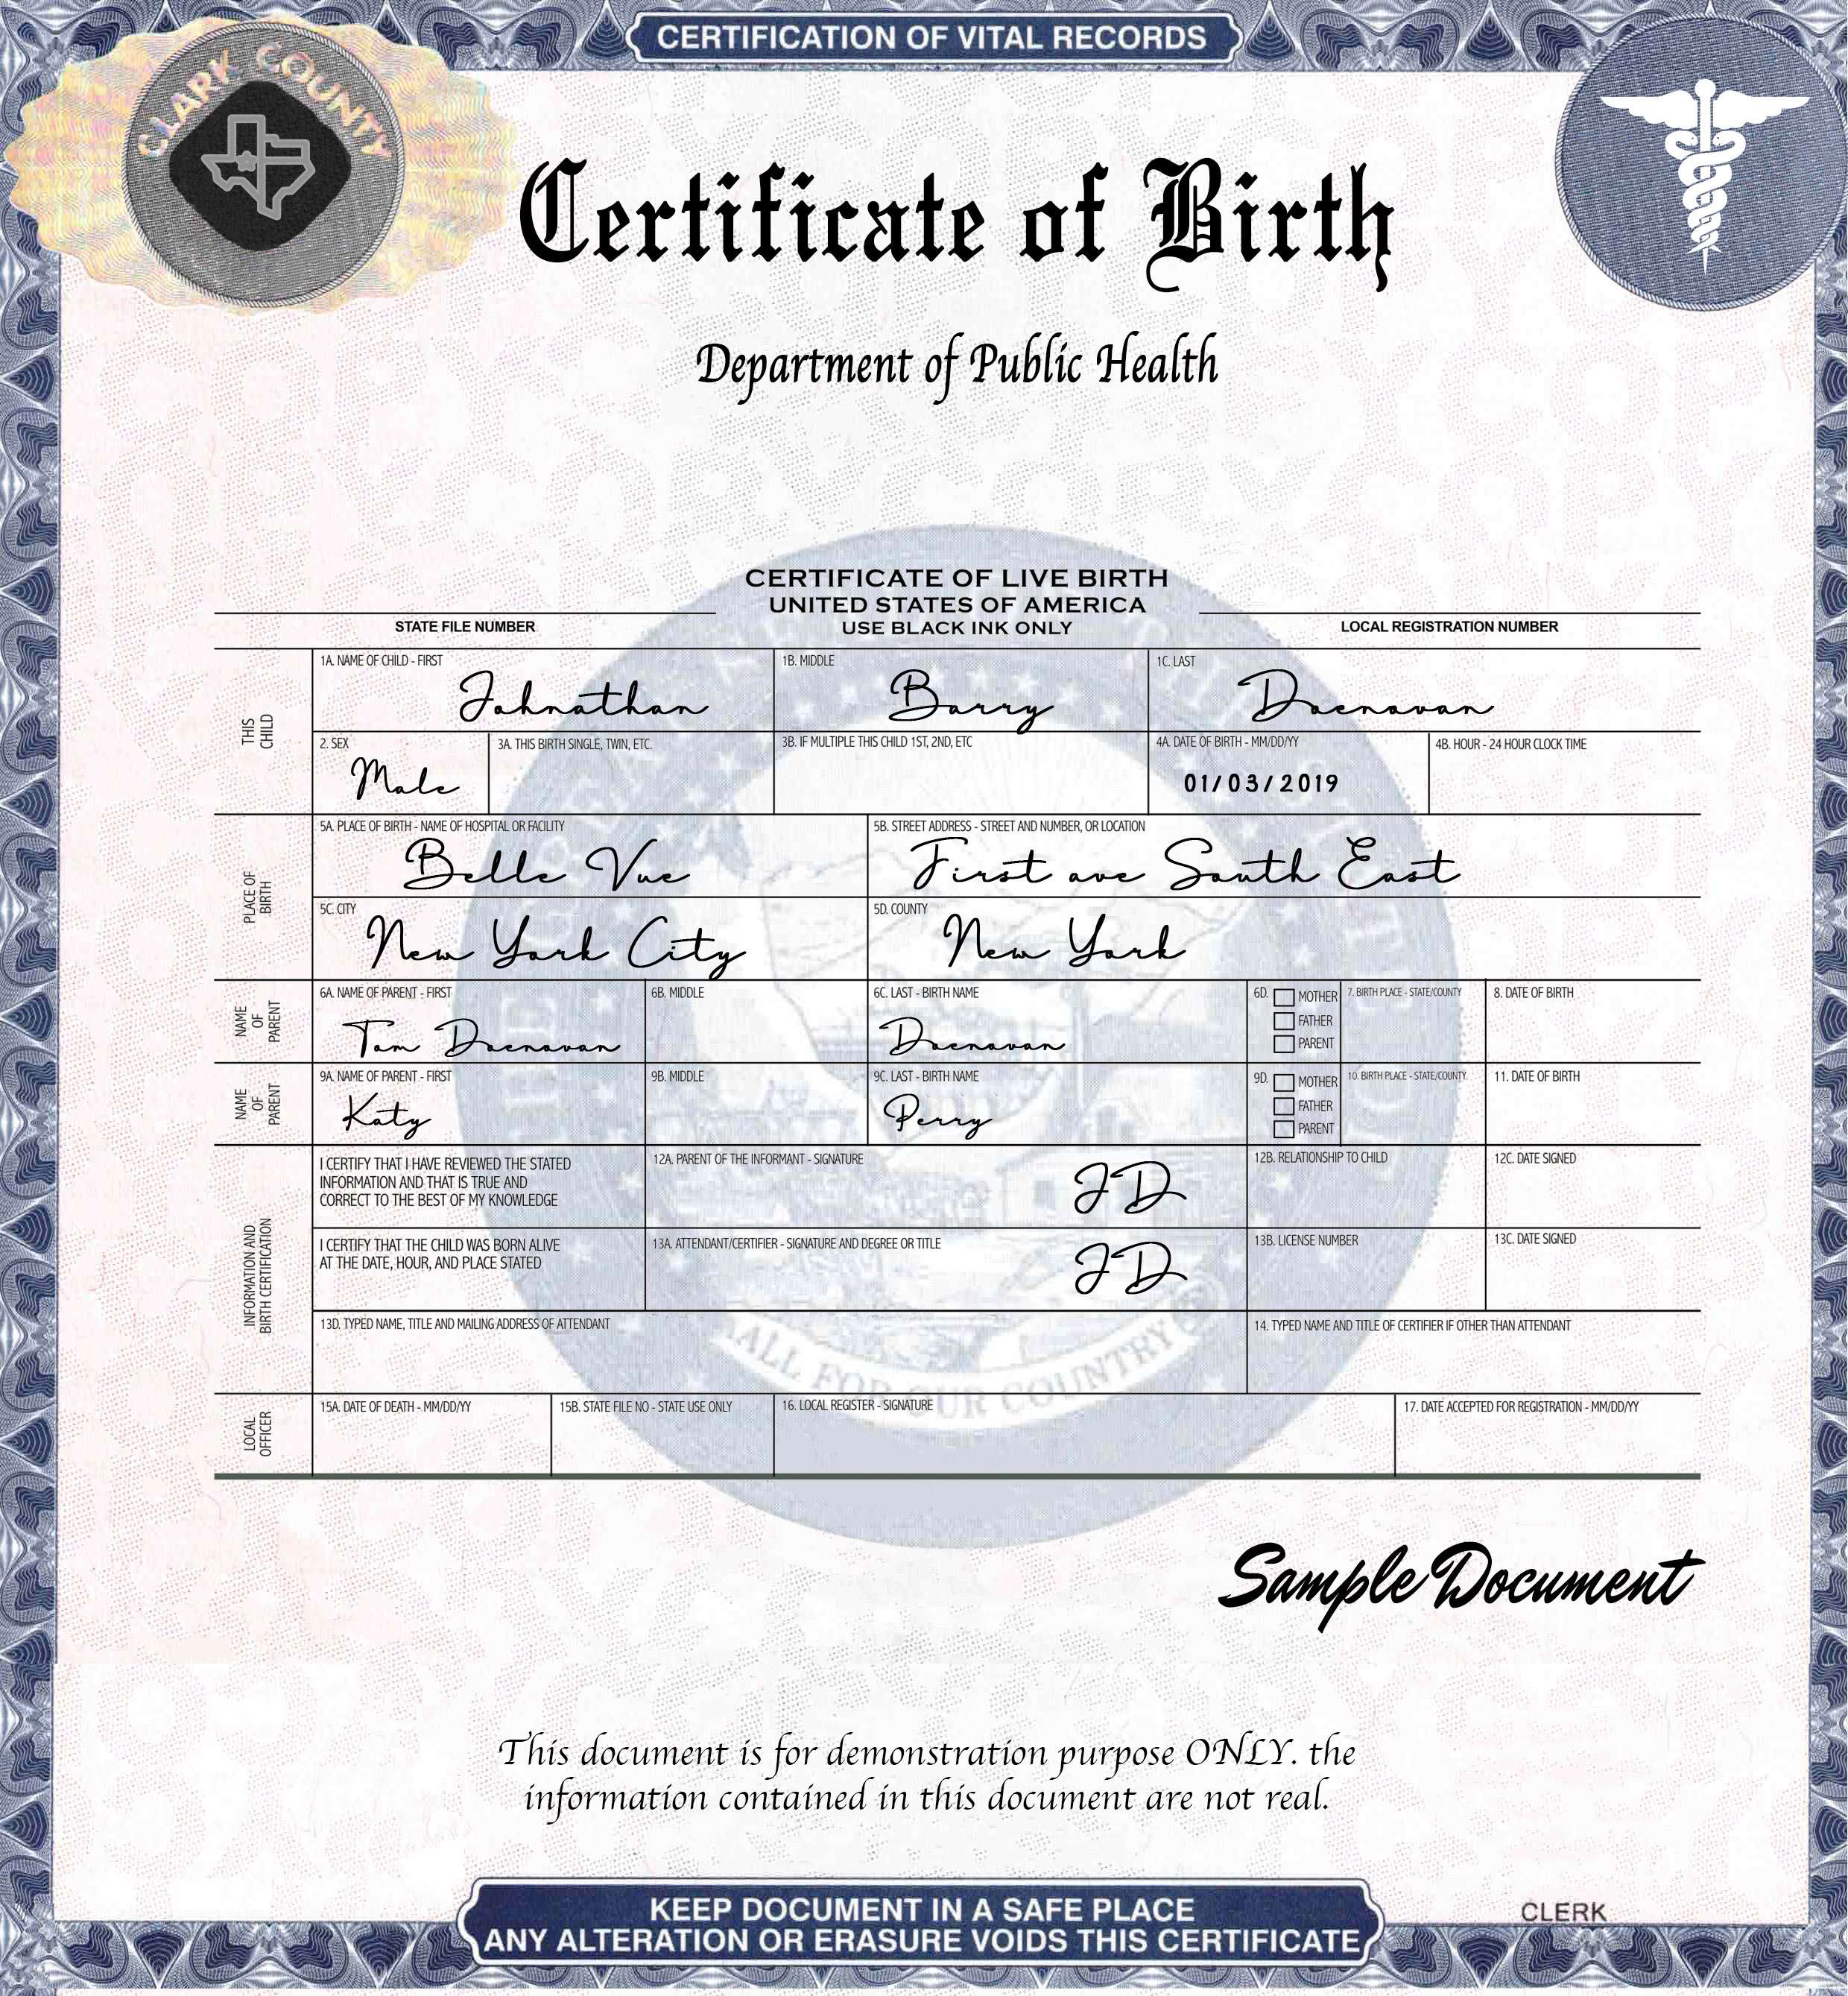 How To Know If a Birth Certificate is Official? Vital Records Online